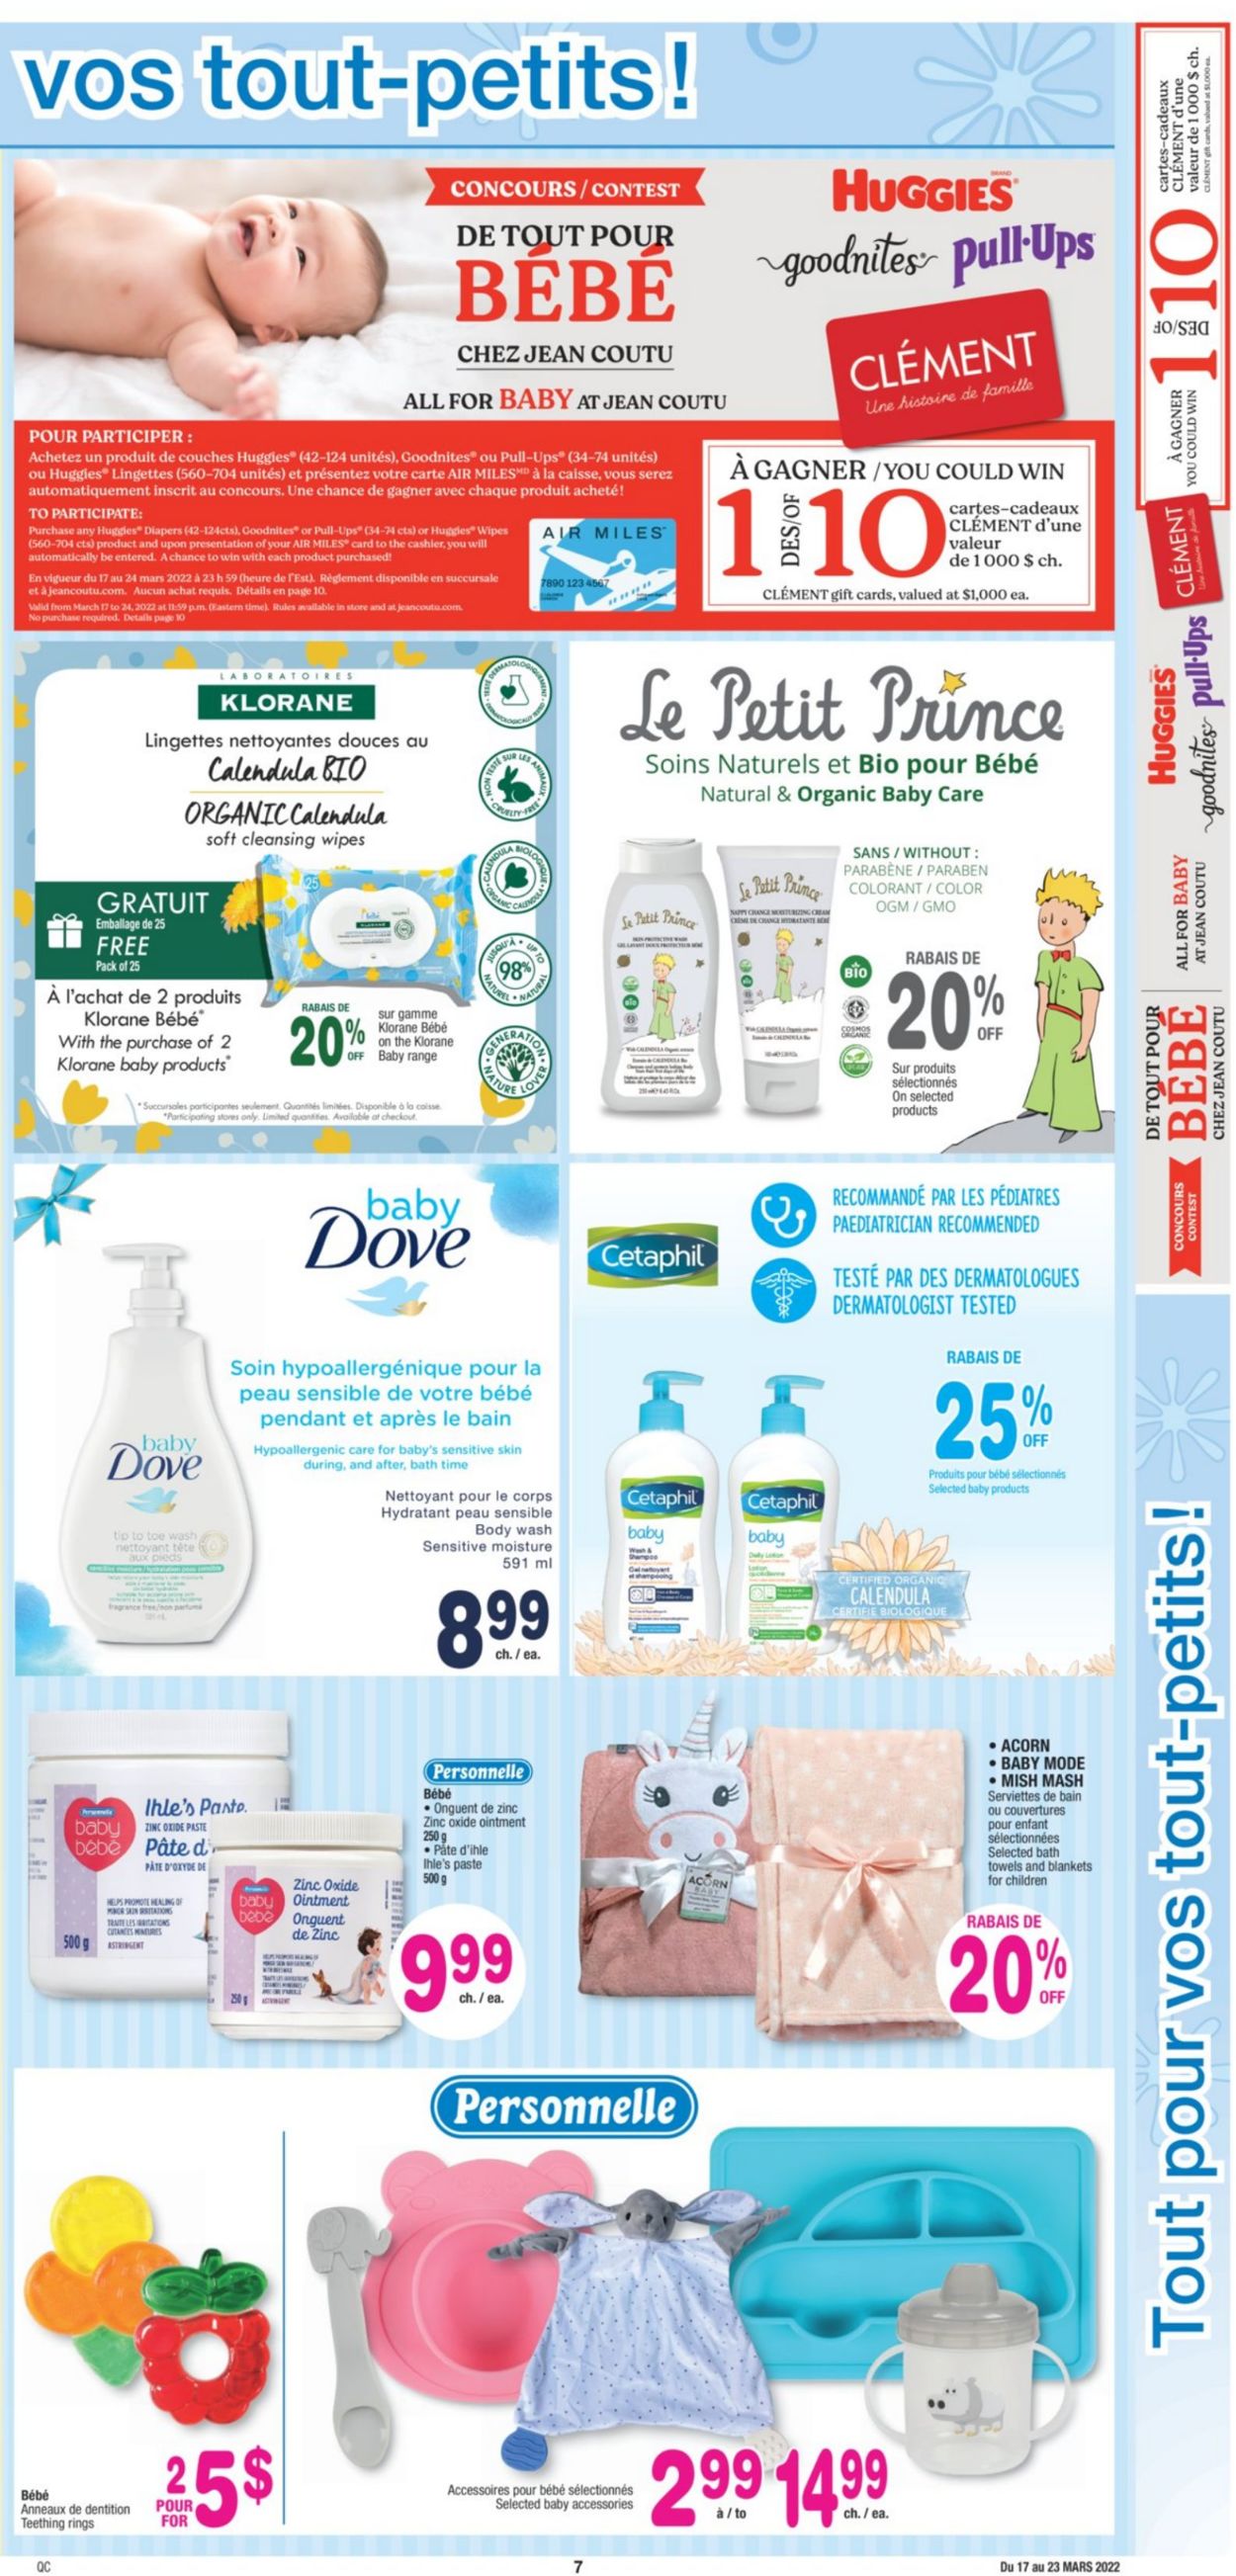 Jean Coutu Flyer from 03/17/2022